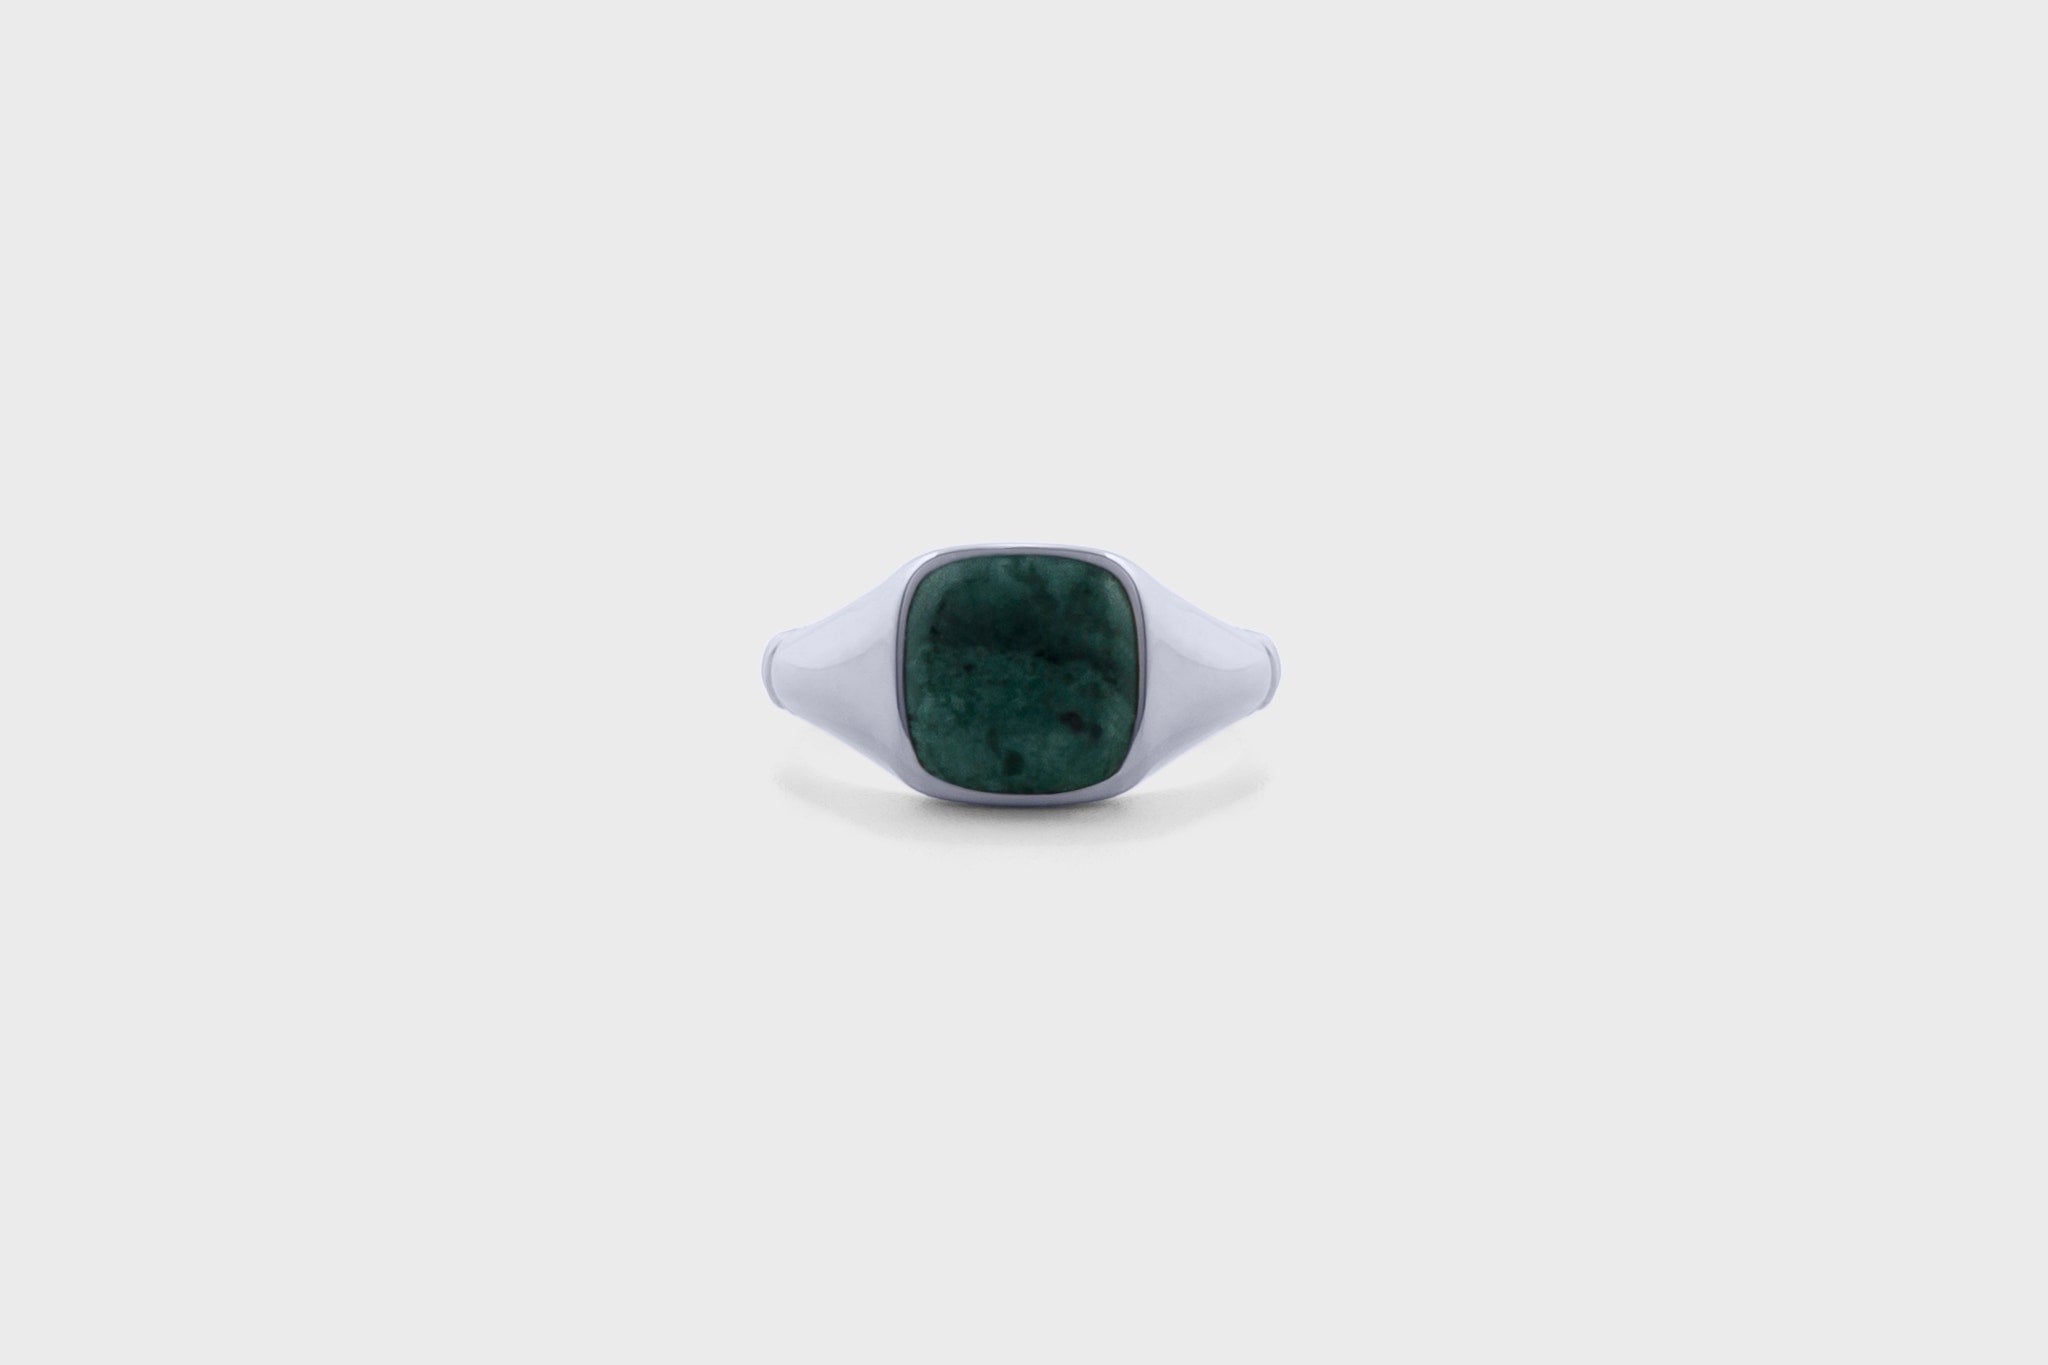 IX Ornate Signet Ring Green Marble Silver